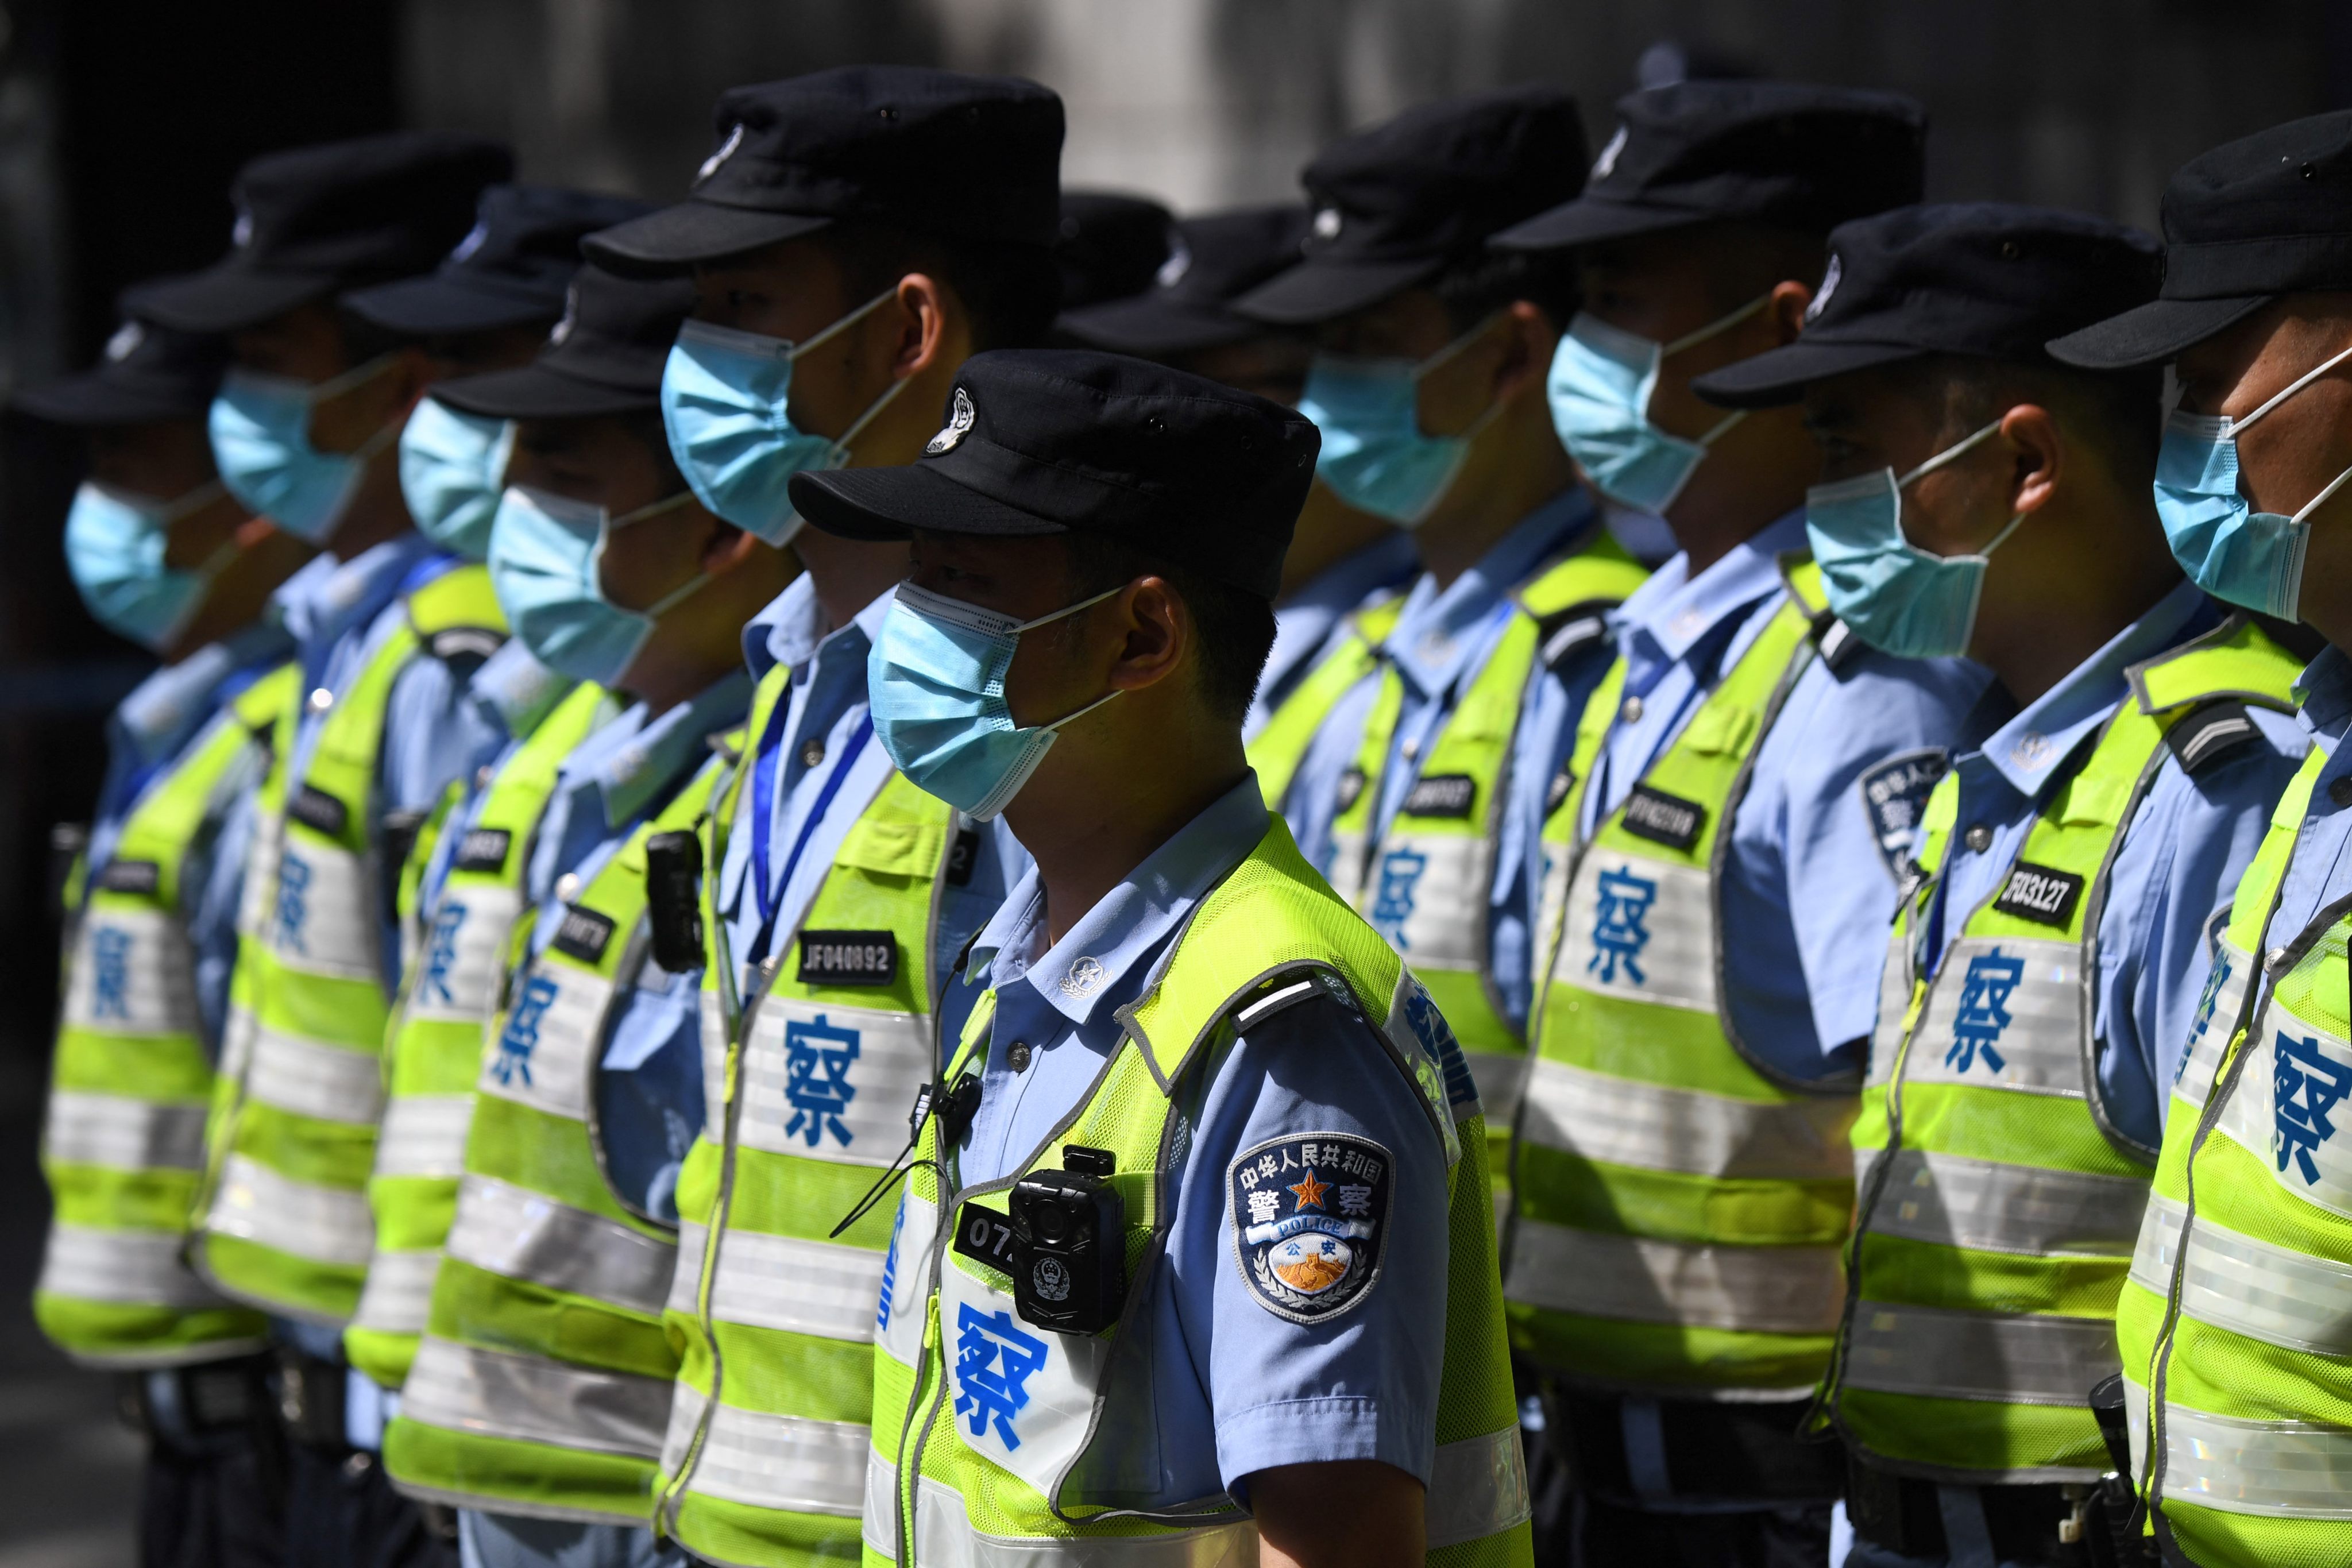 A policeman whose force is investigating the assault in Tangshan says a forensic bureau downplayed injuries he suffered in a hit-and-run to protect criminals. Photo: AFP